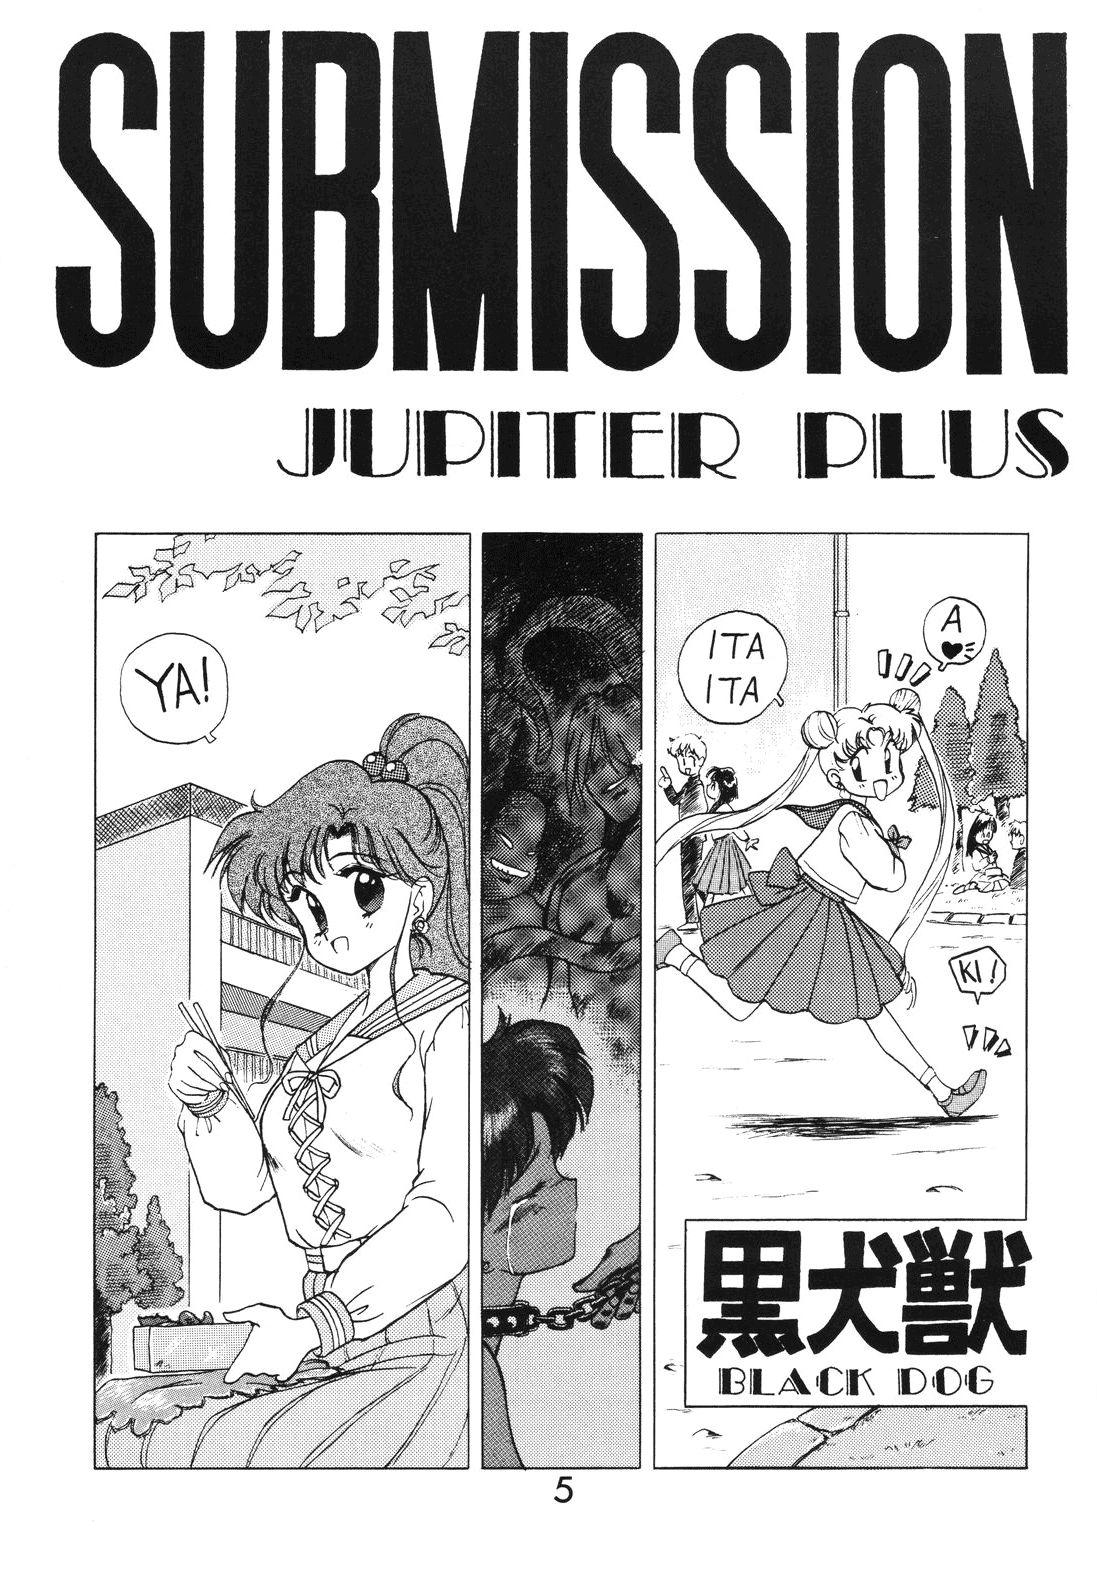 Pissing SUBMISSION JUPITER PLUS - Sailor moon Puto - Page 5